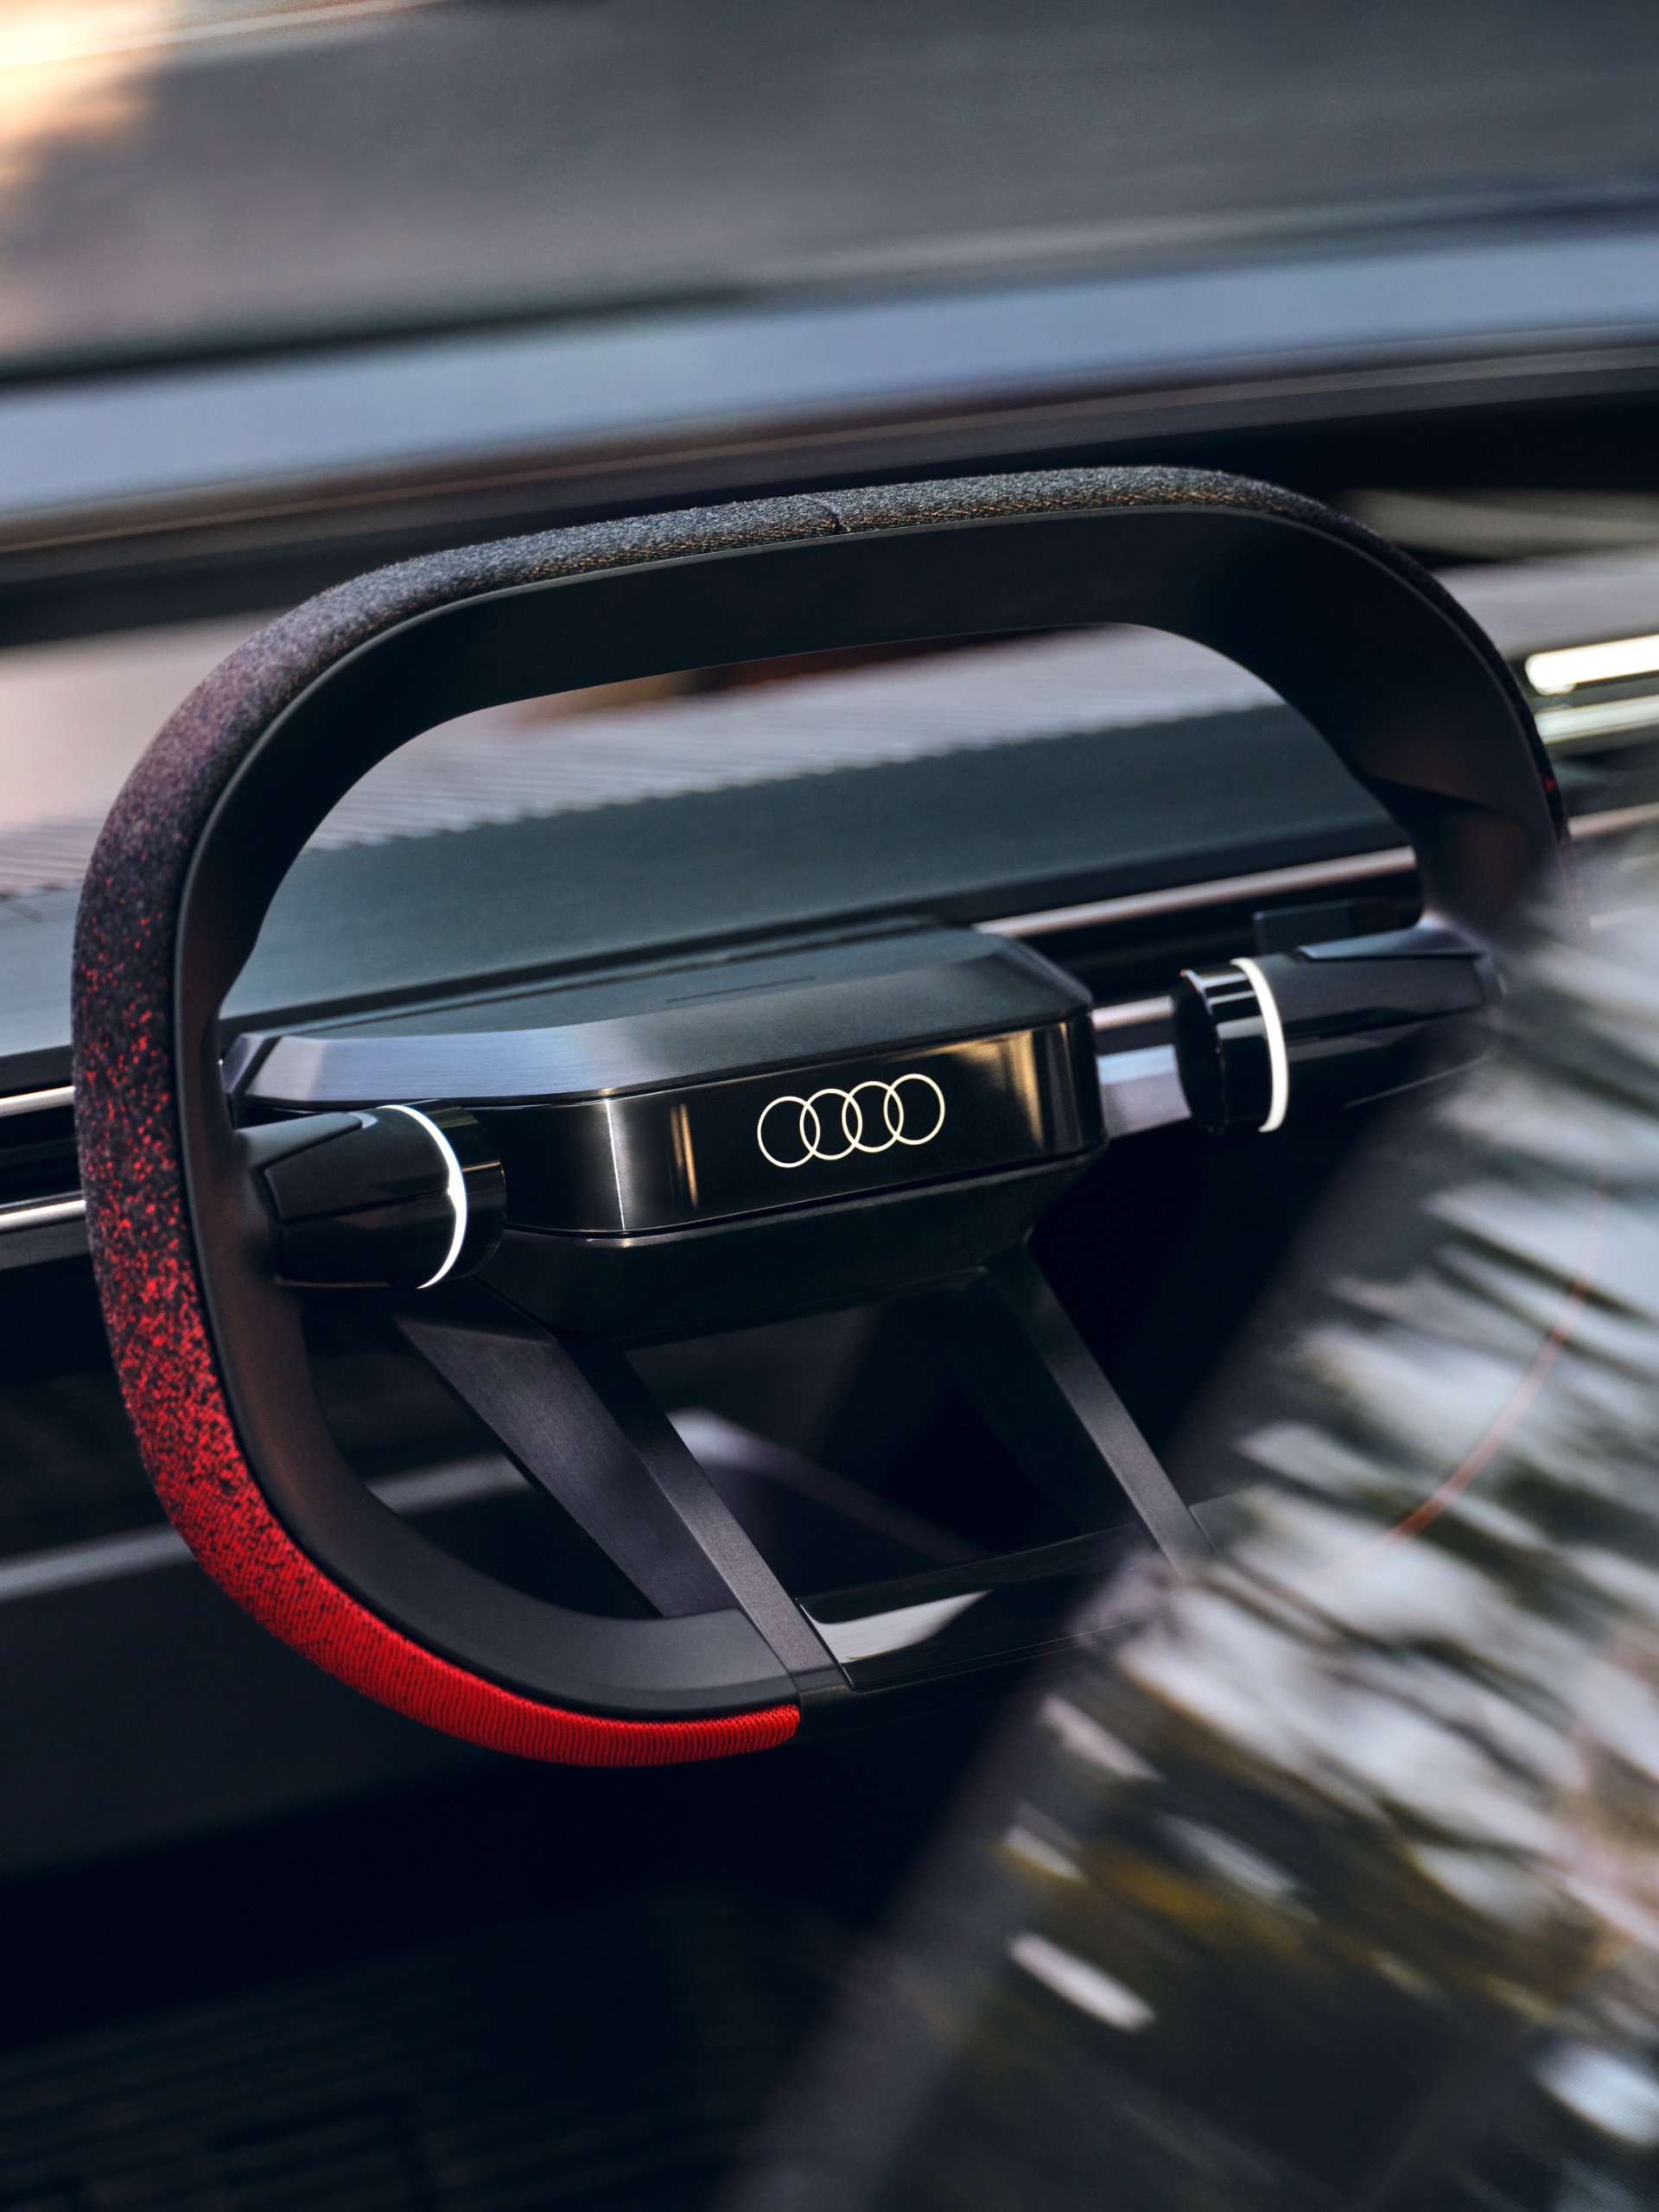 The steering wheel in the Audi activesphere concept.